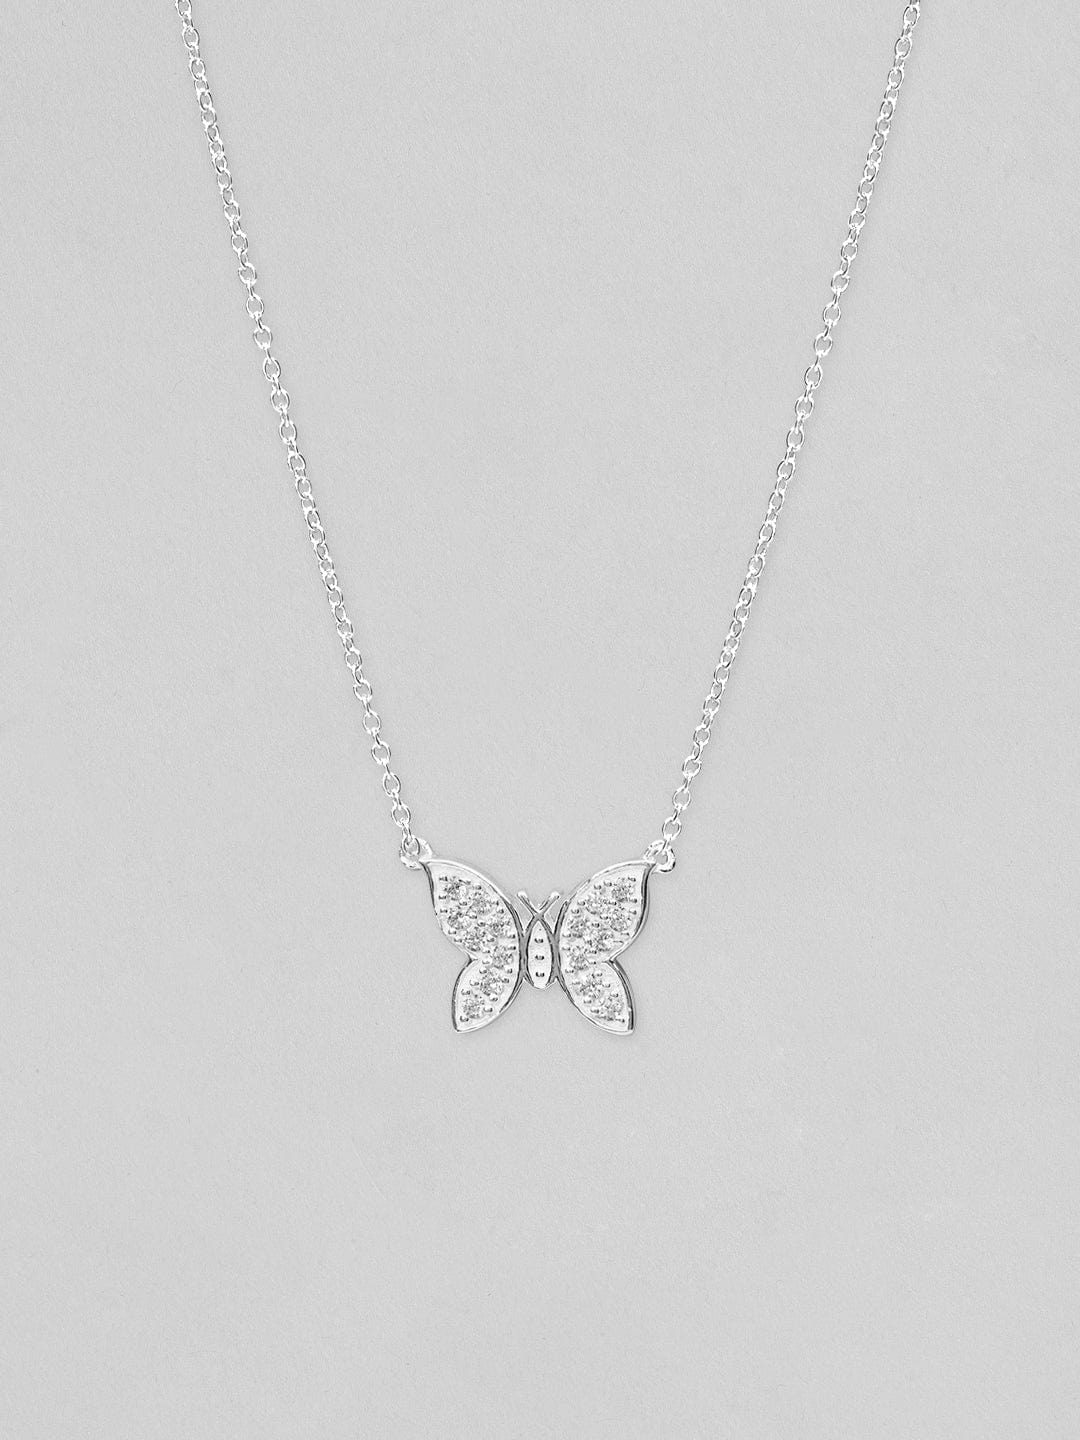 Rubans 925 Silver Pave Butterfly Pendant Necklace. Chain & Necklaces